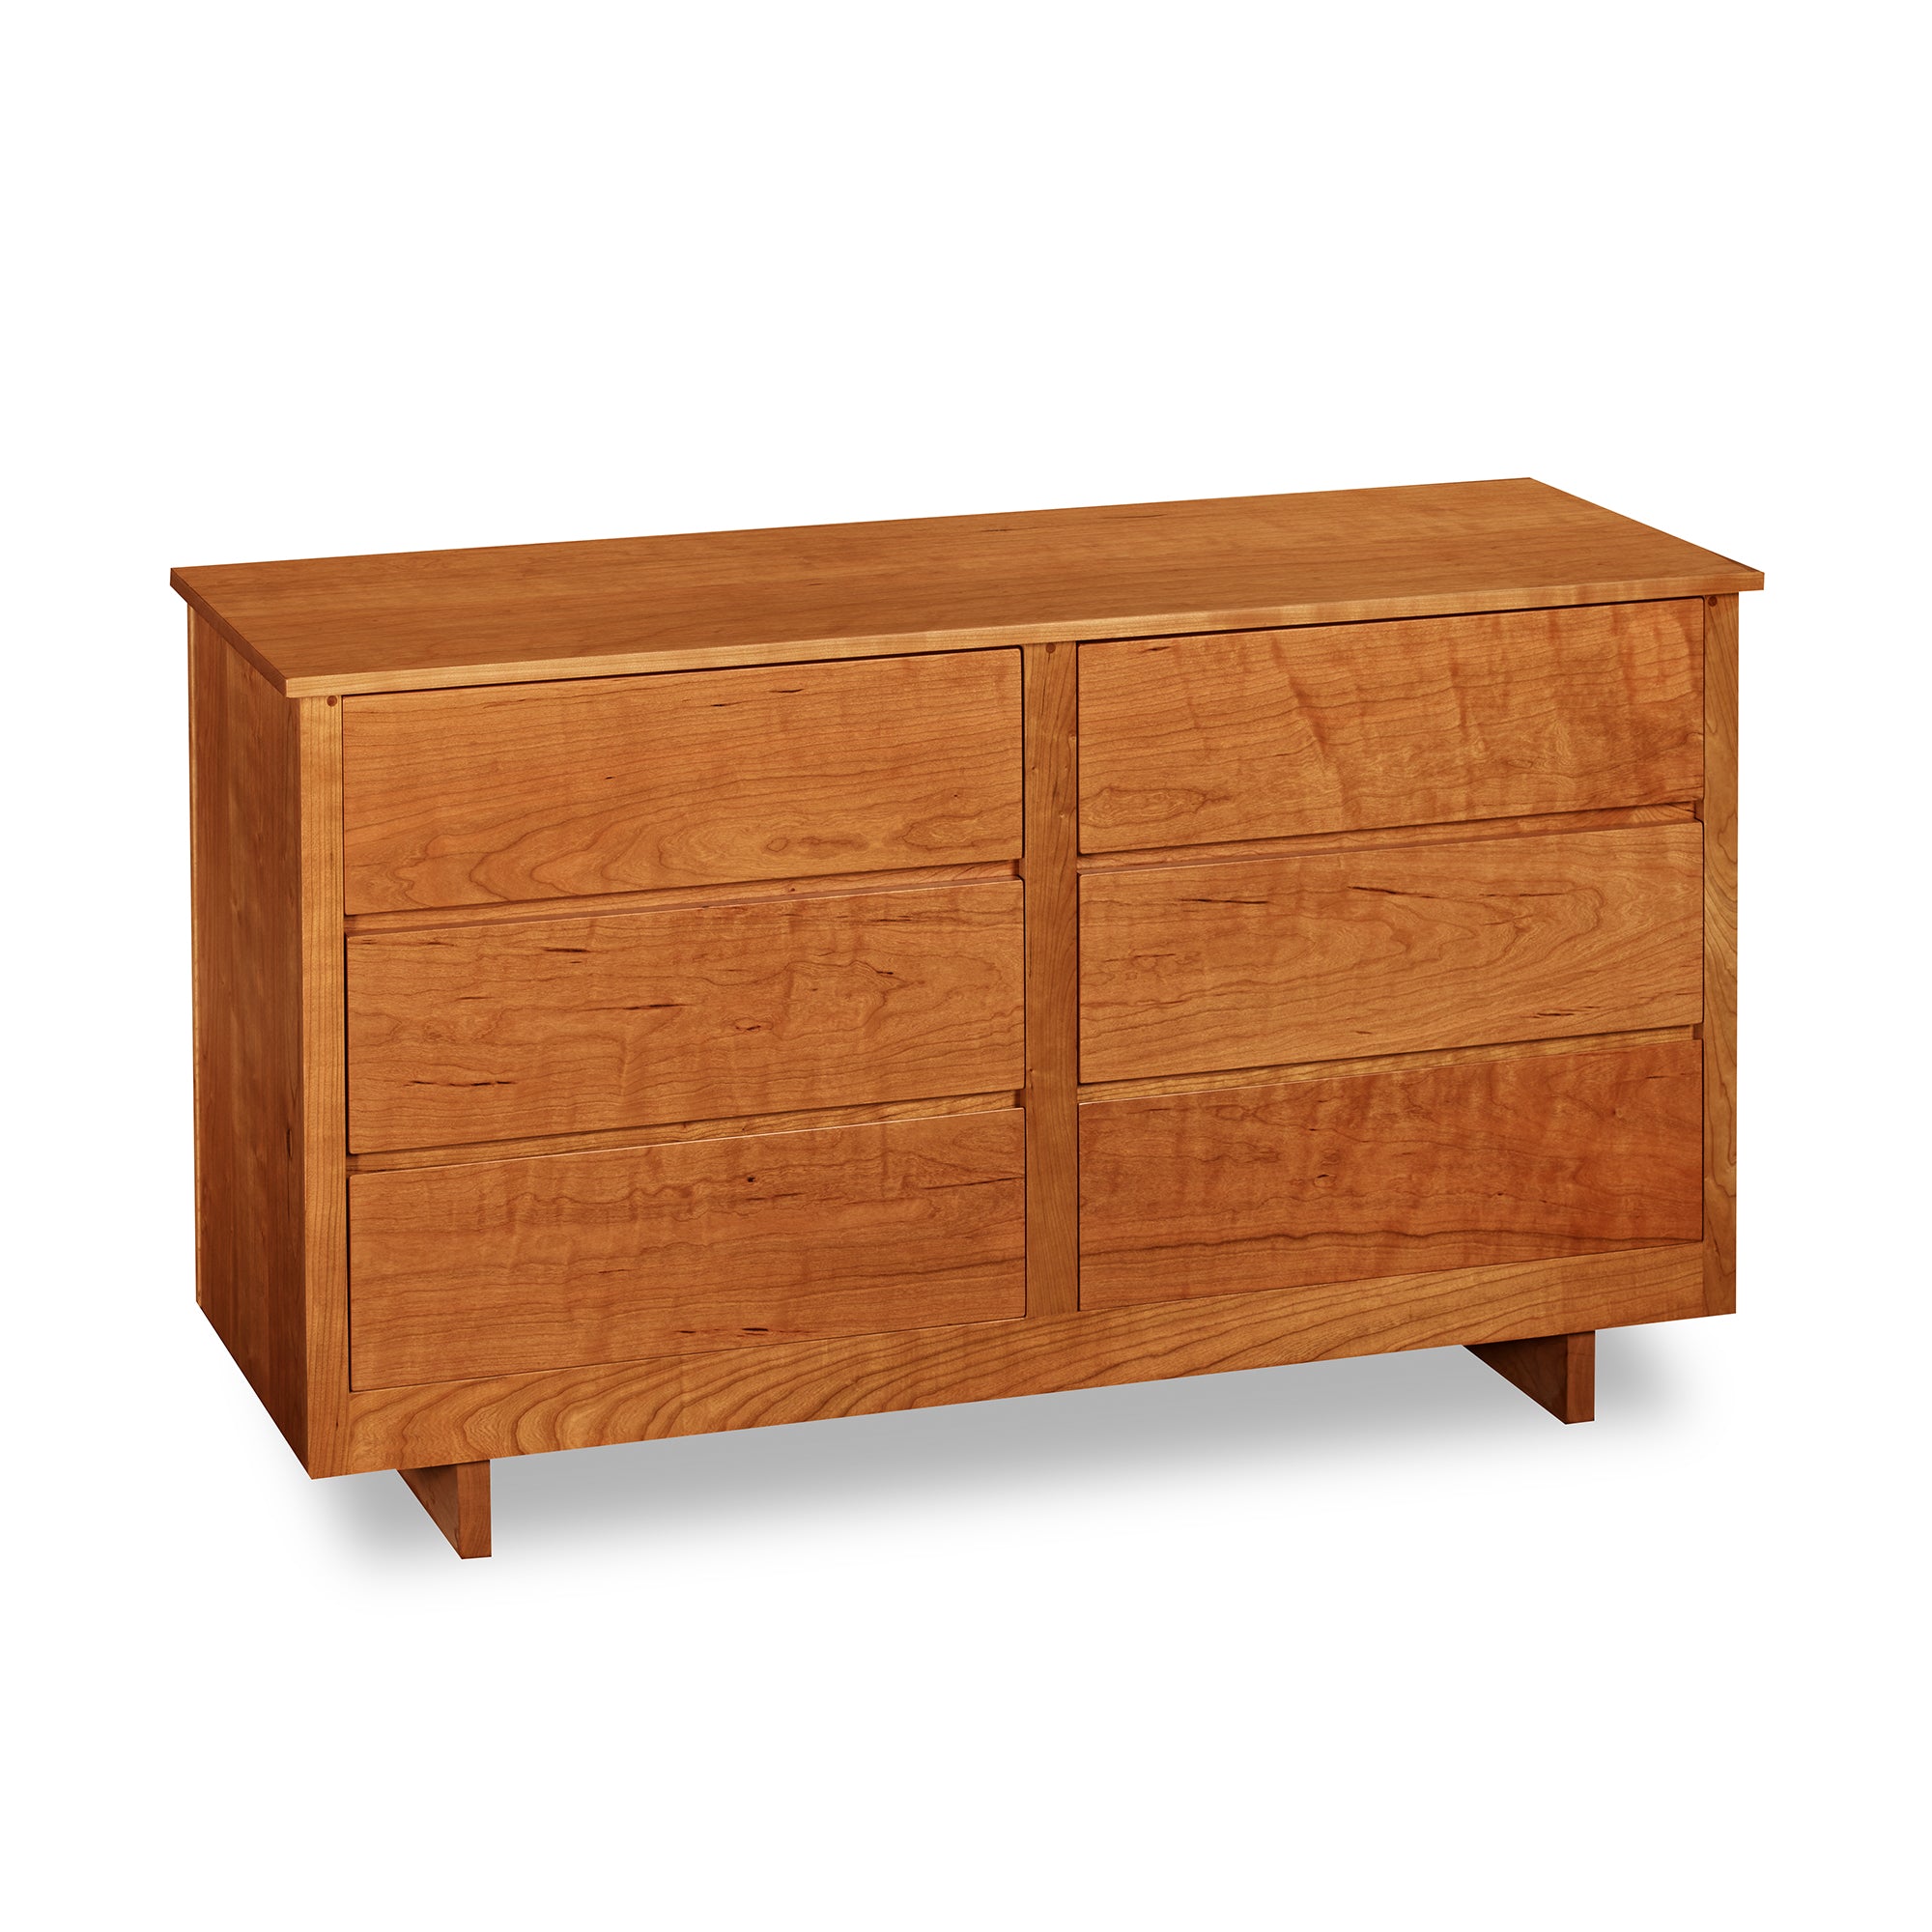 Chilton Furniture's Acadia collection six drawer cherry bedroom dresser with under drawer pulls and panel base